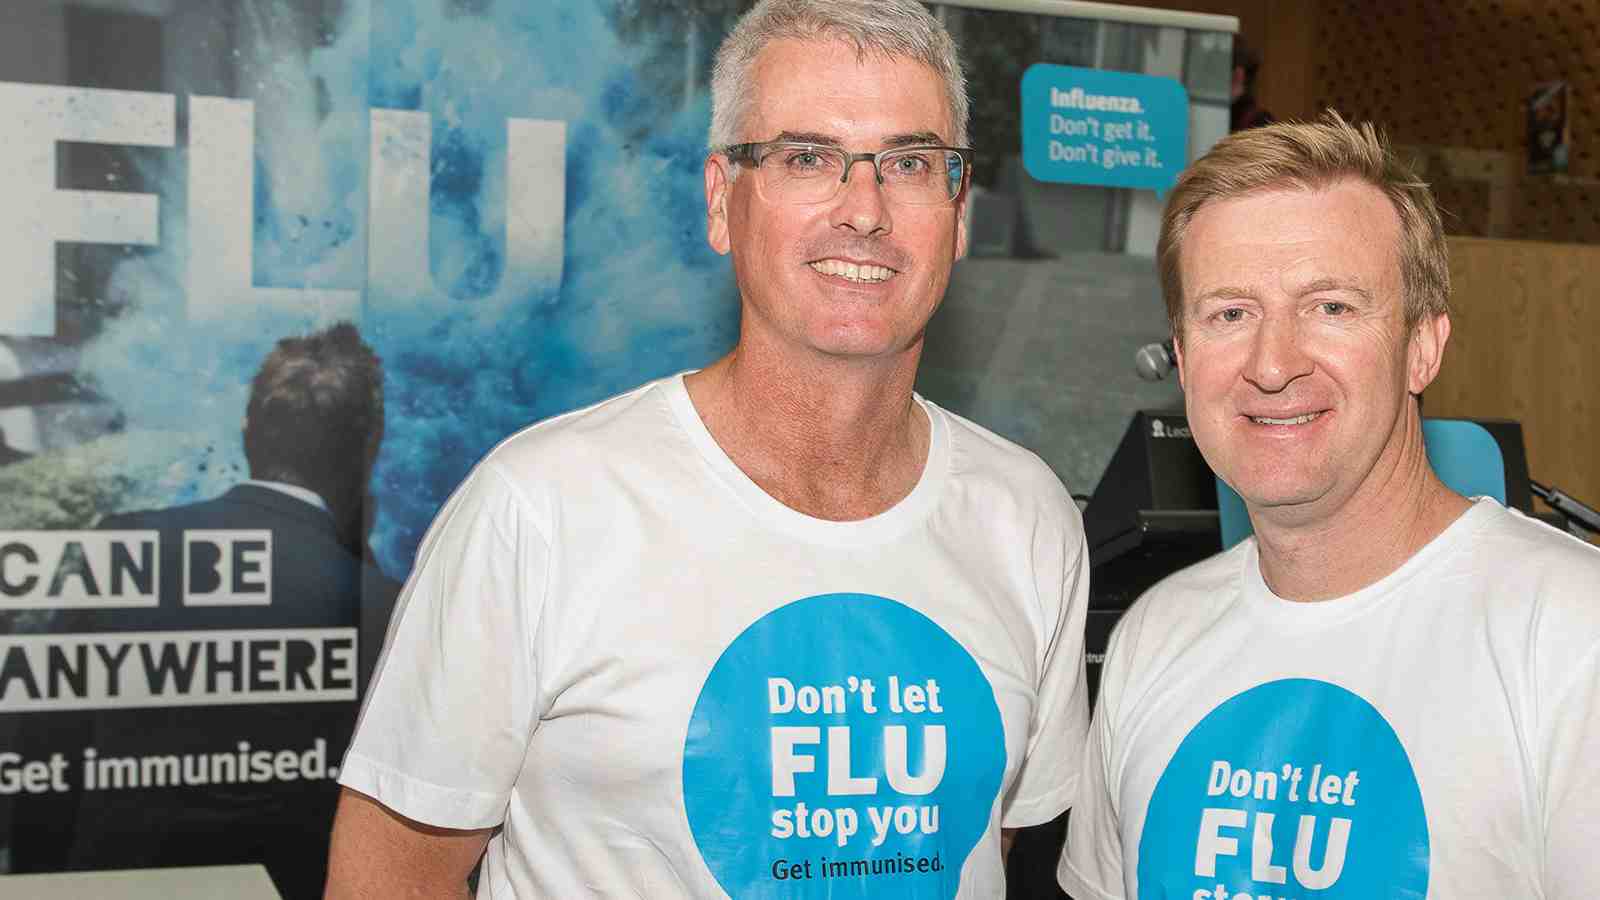 The national influenza immunisation campaign has been launched by Health Minister Jonathan Coleman at Victoria University.